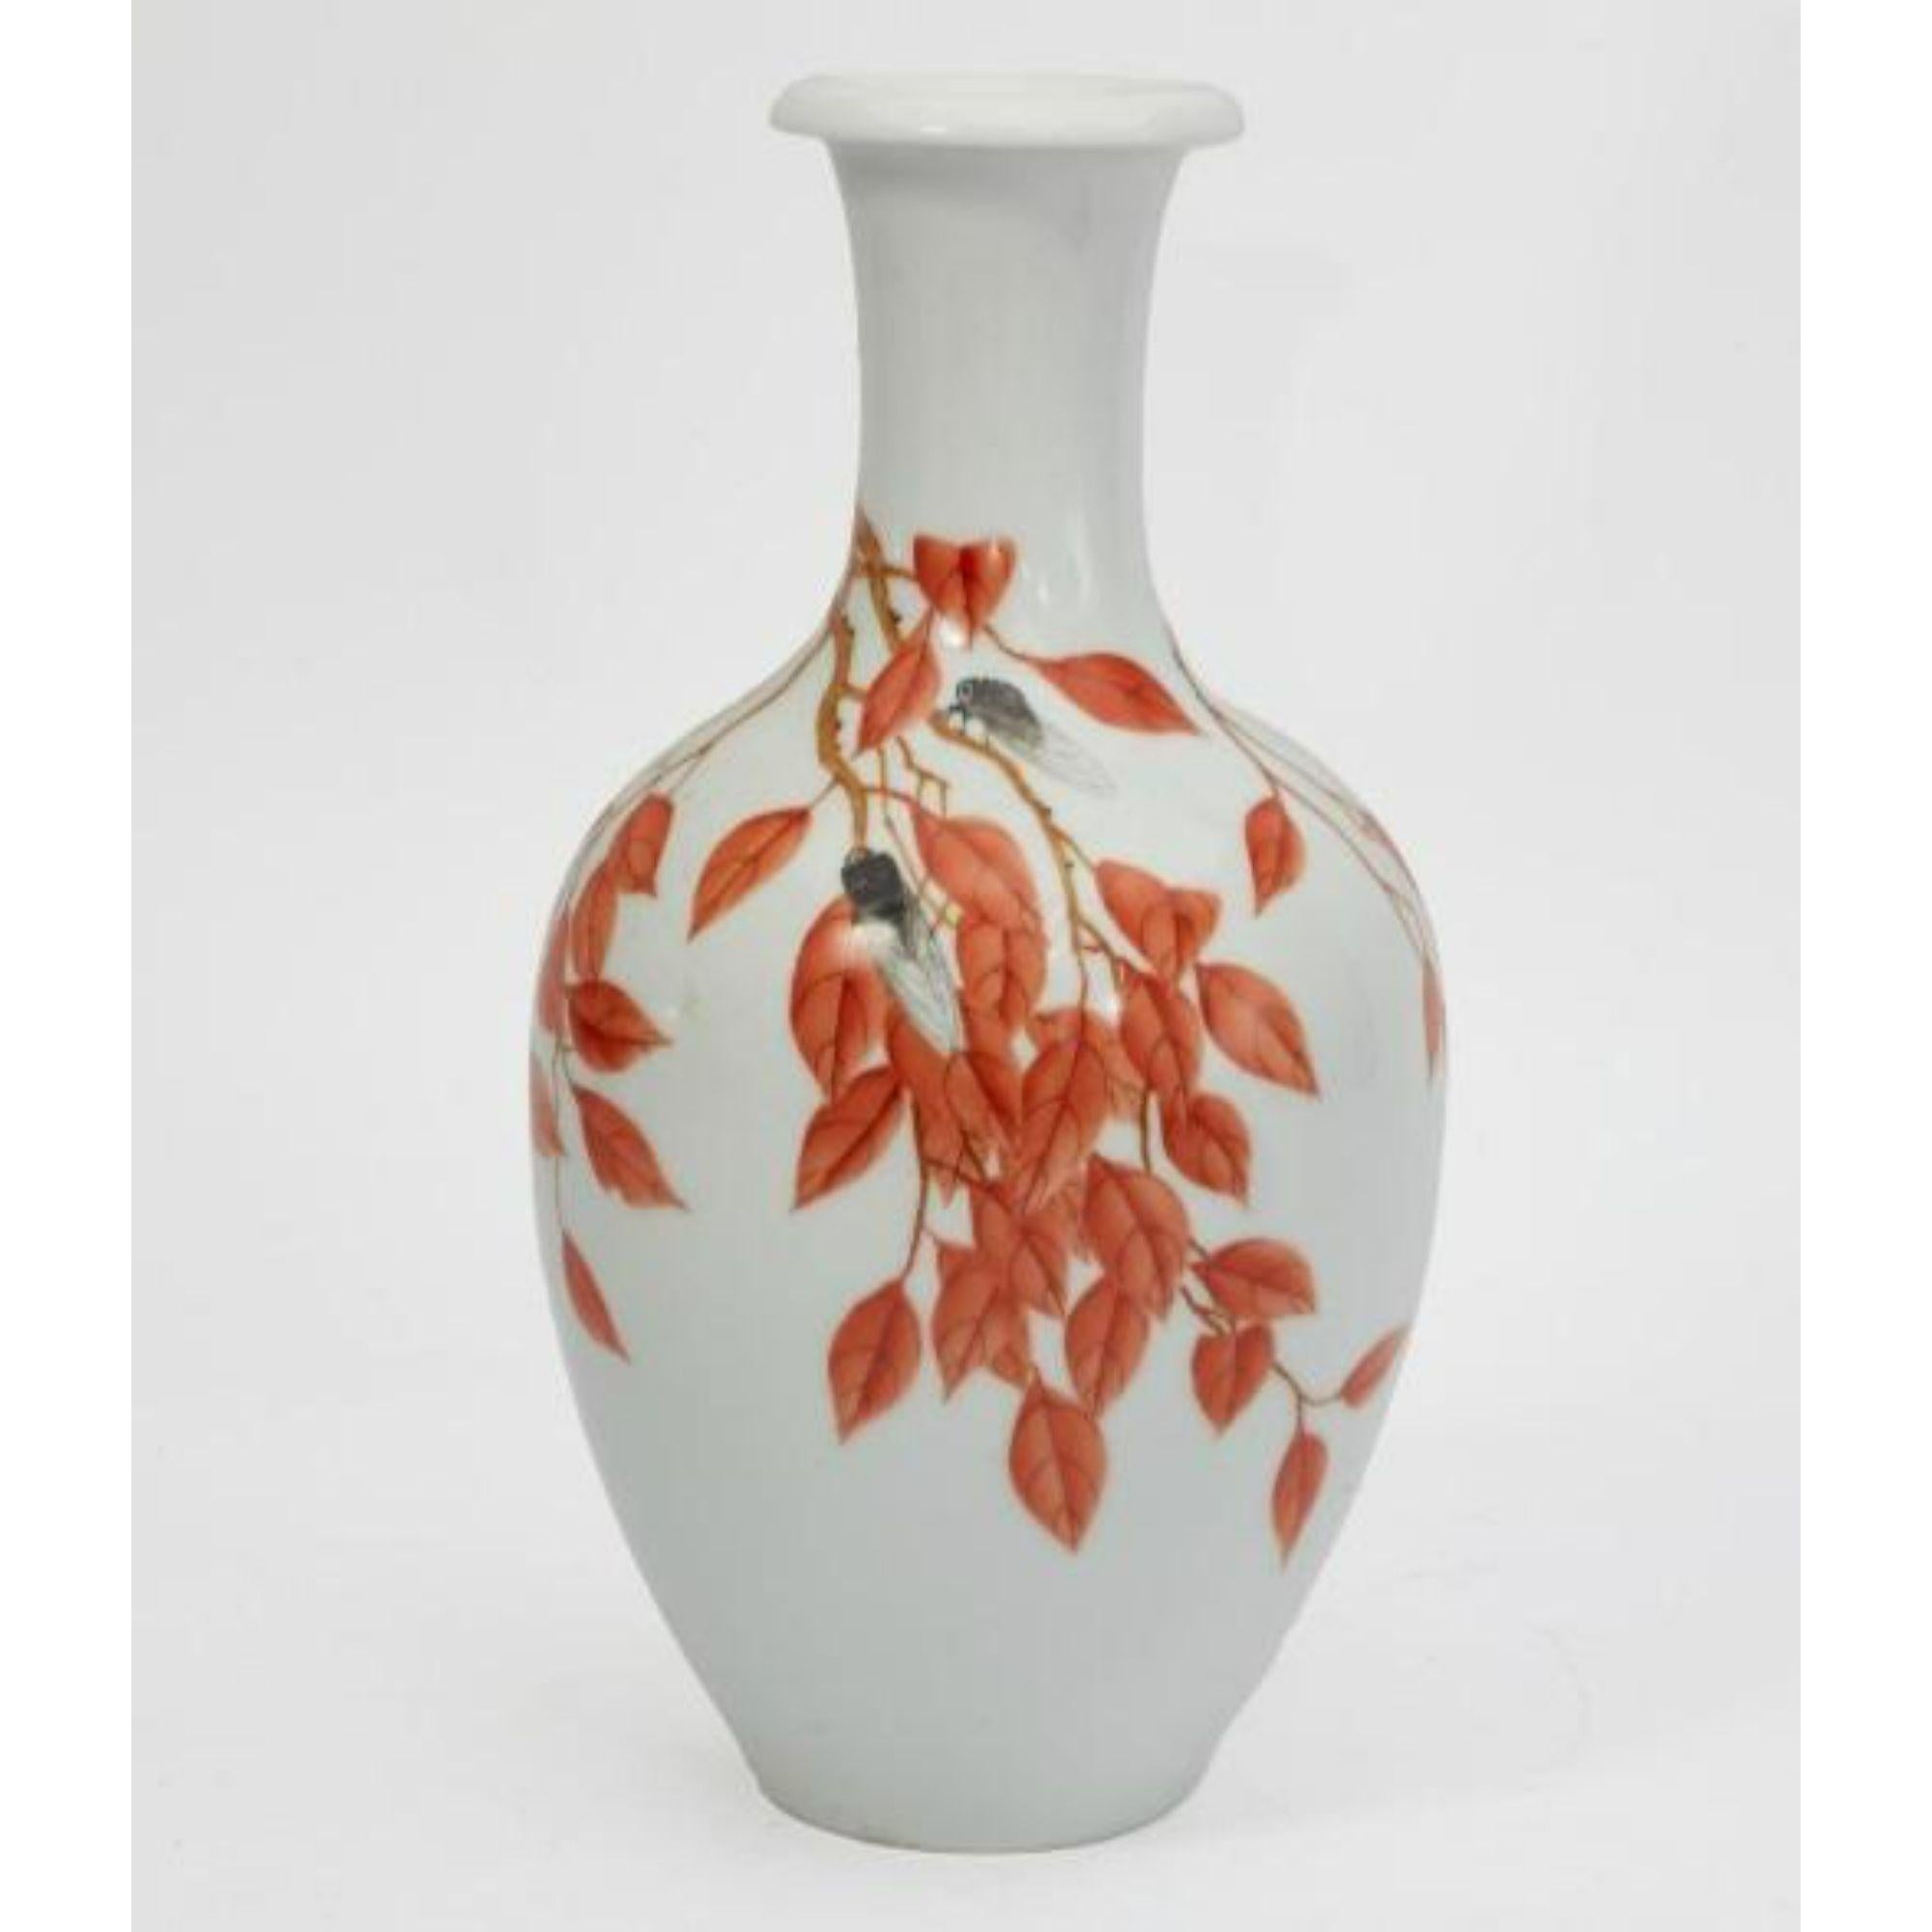 Antique Chinese porcelain insect vase with red leaves. It is a large example and measures 16.5